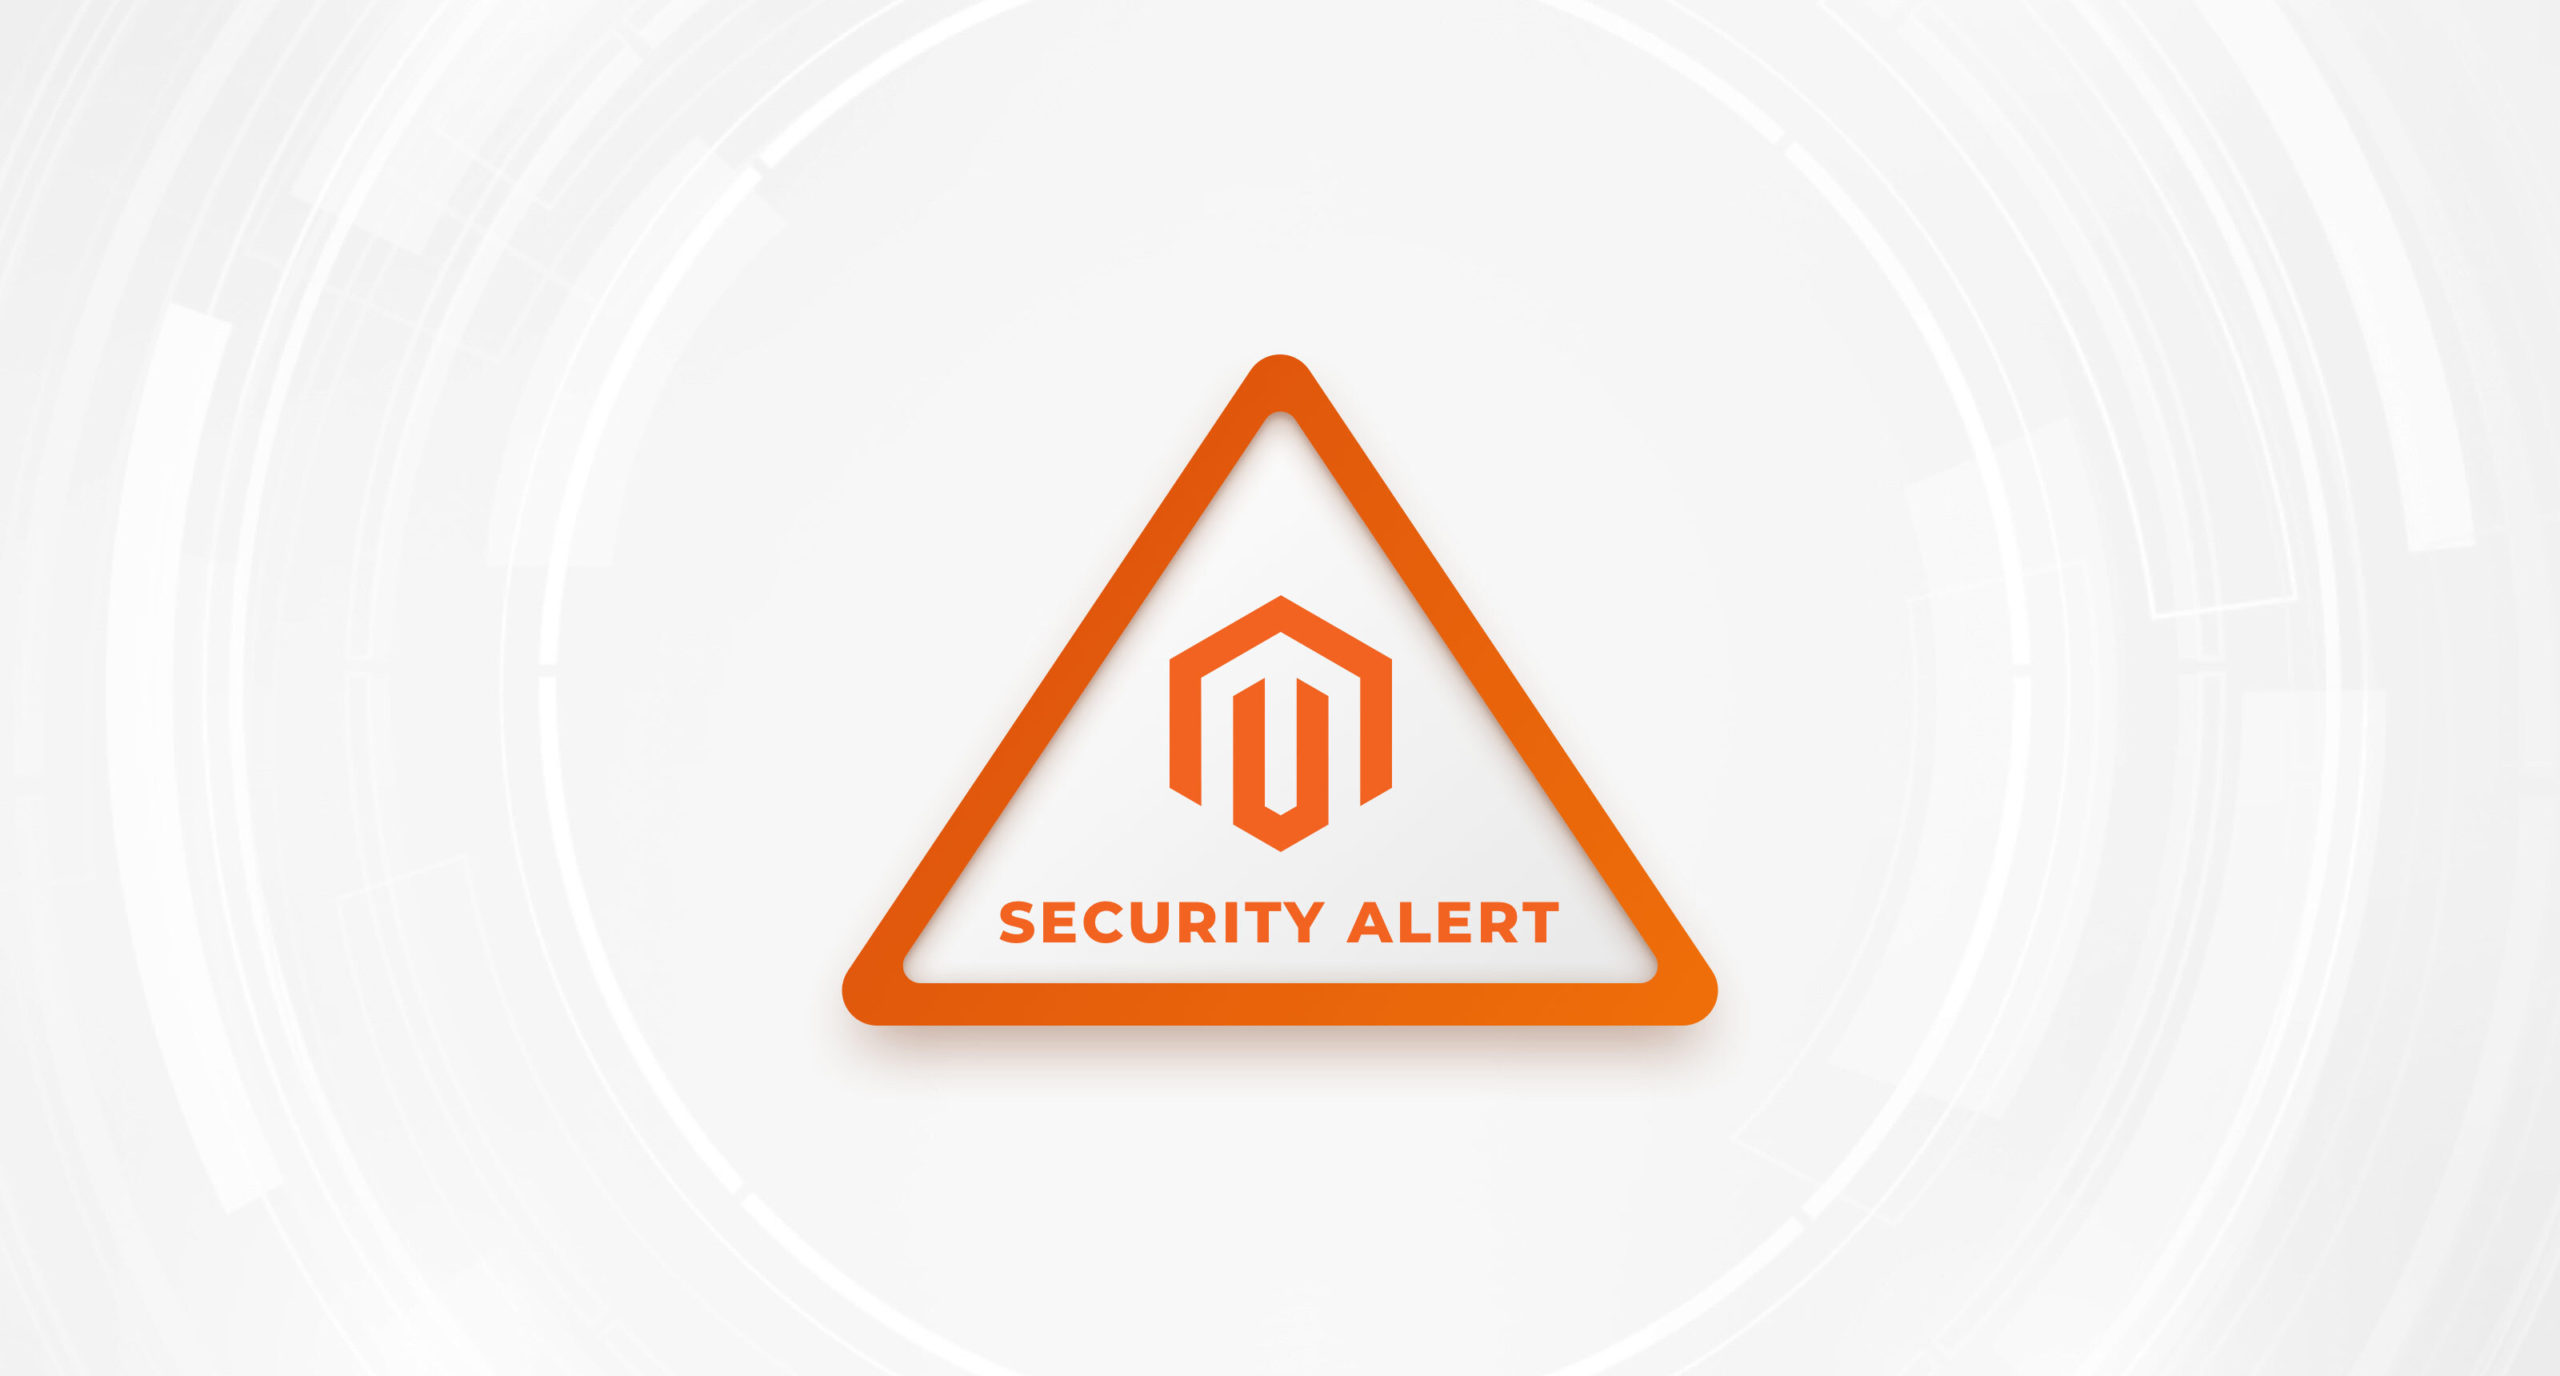 More than 2,000 Magento 1 Stores Hacked – The Largest Breach Since 2015